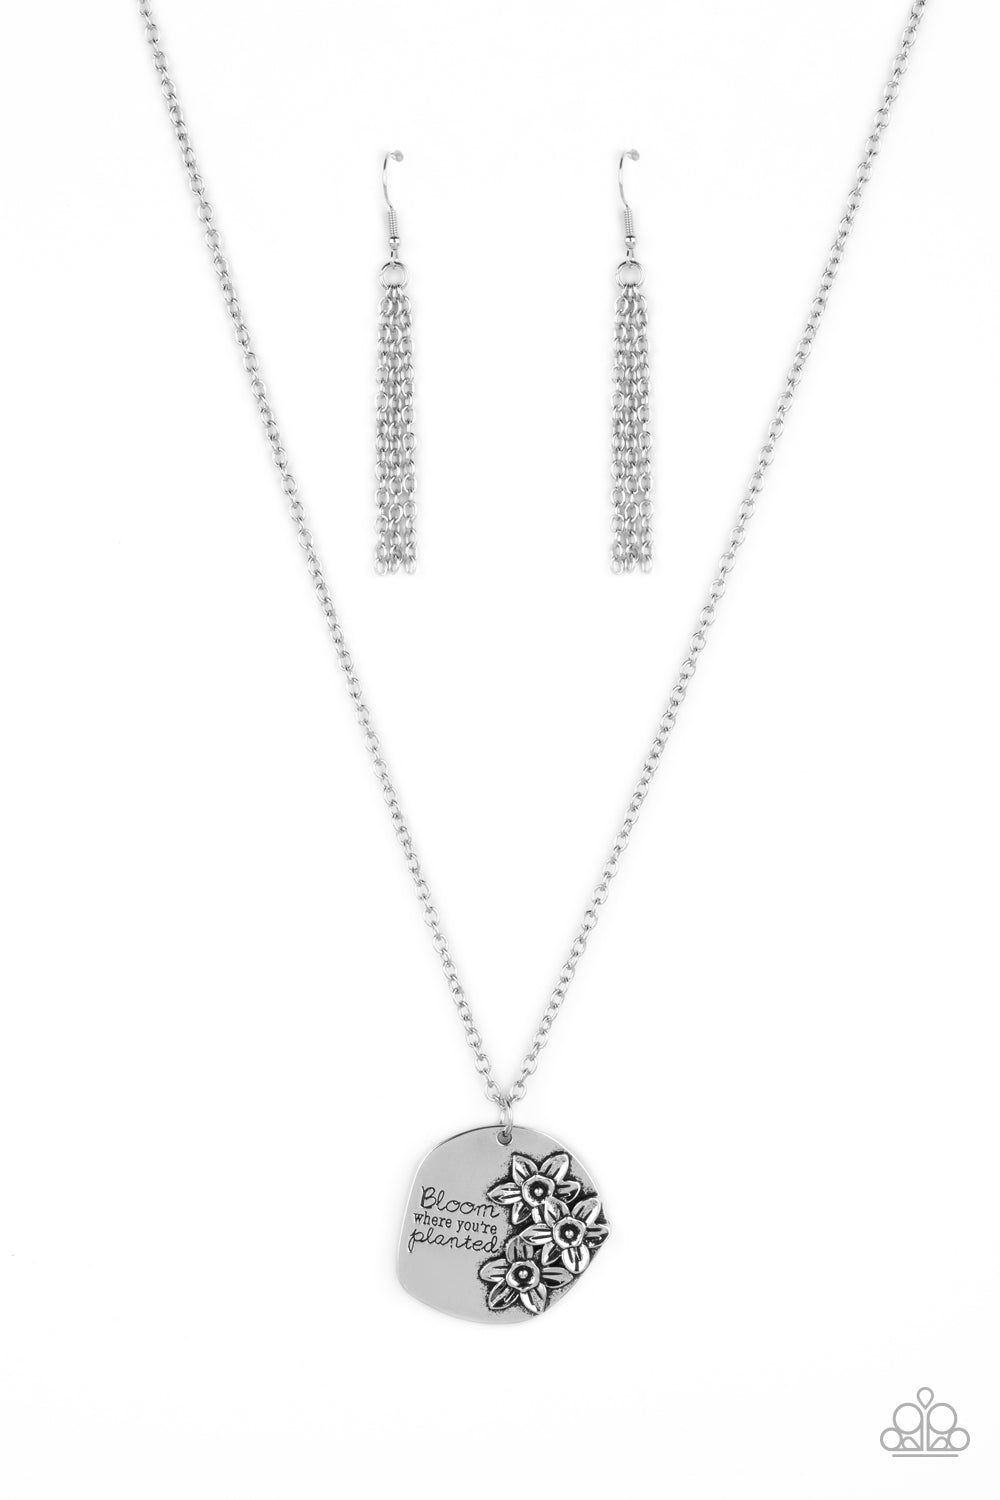 Planted Possibilities - Silver Necklace Set - Princess Glam Shop